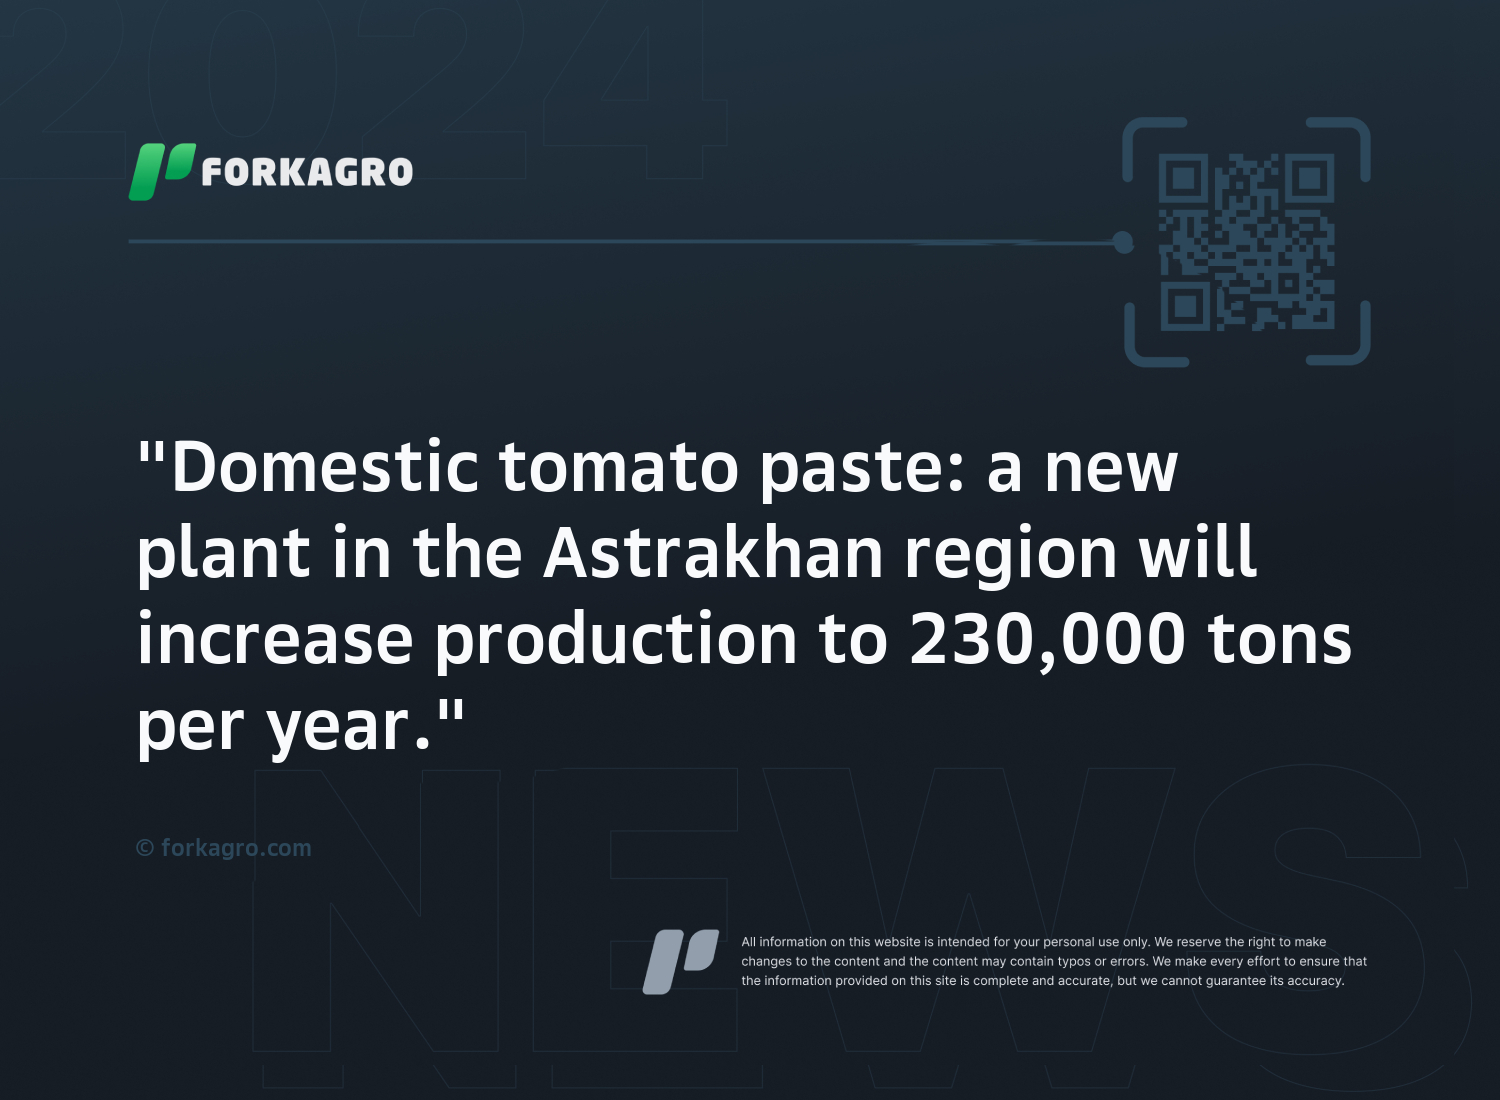 "Domestic tomato paste: a new plant in the Astrakhan region will increase production to 230,000 tons per year."